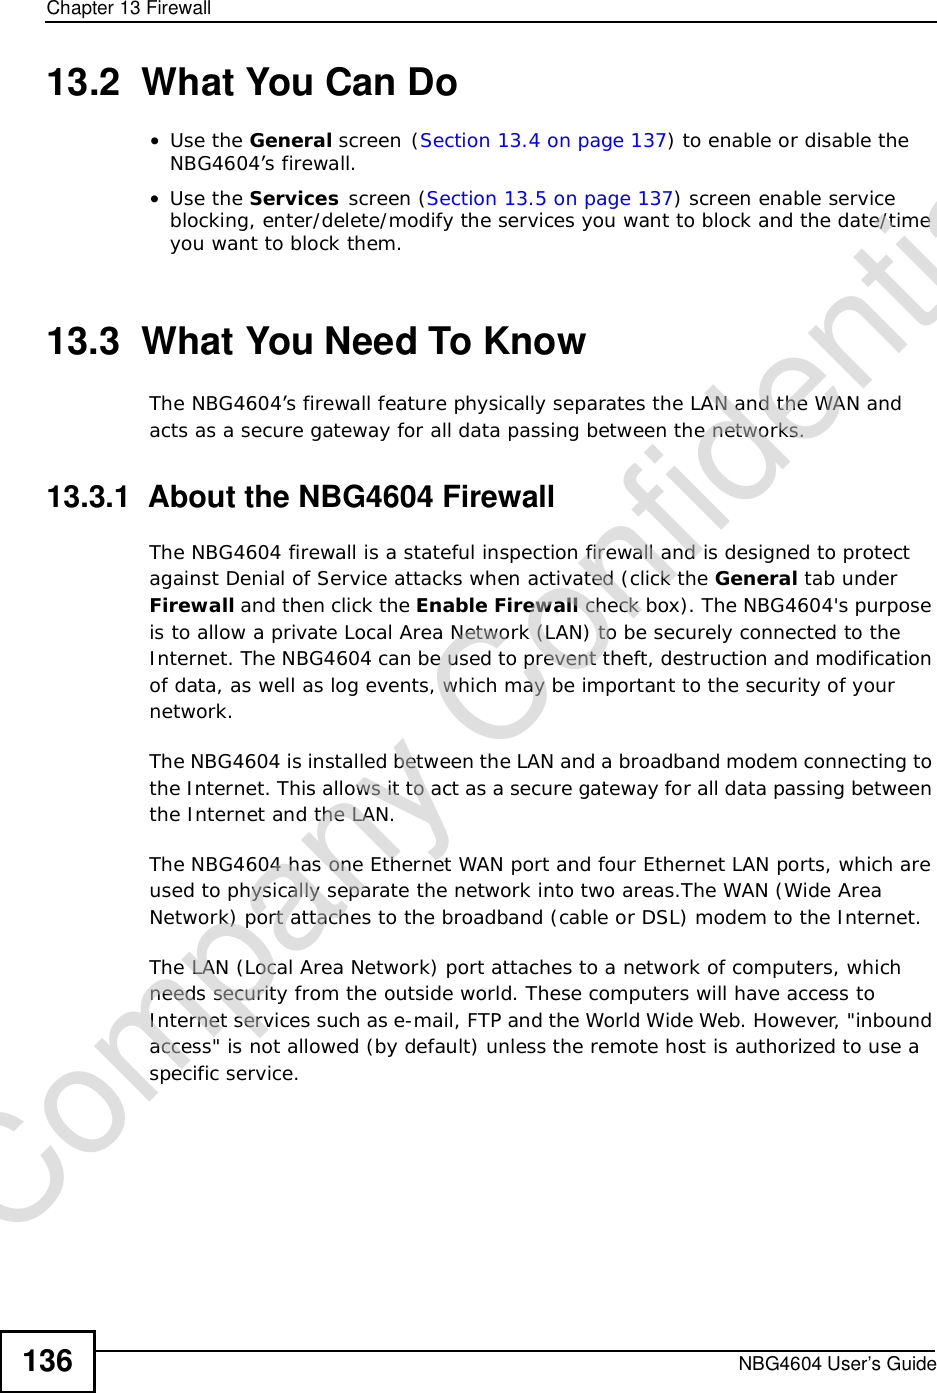 Chapter 13FirewallNBG4604 User’s Guide13613.2  What You Can Do•Use the General screen(Section 13.4 on page 137) to enable or disable the NBG4604’s firewall.•Use the Services screen (Section 13.5 on page 137) screen enable service blocking, enter/delete/modify the services you want to block and the date/time you want to block them. 13.3  What You Need To KnowThe NBG4604’s firewall feature physically separates the LAN and the WAN and acts as a secure gateway for all data passing between the networks.13.3.1  About the NBG4604 FirewallThe NBG4604 firewall is a stateful inspection firewall and is designed to protect against Denial of Service attacks when activated (clickthe General tab underFirewall and then click the EnableFirewall check box). The NBG4604&apos;s purpose is to allow a private Local Area Network (LAN) to be securely connected to the Internet. The NBG4604 can be used to prevent theft, destruction and modification of data, as well as log events, which may be important to the security of your network. The NBG4604 is installed between the LAN and a broadband modem connecting to the Internet. This allows it to act as a secure gateway for all data passing between the Internet and the LAN.The NBG4604 has one Ethernet WAN port and four Ethernet LAN ports, which are used to physically separate the network into two areas.The WAN (Wide Area Network) port attaches to the broadband (cable or DSL) modem to the Internet.The LAN (Local Area Network) port attaches to a network of computers, which needs security from the outside world. These computers will have access to Internet services such as e-mail, FTP and the World Wide Web. However, &quot;inbound access&quot; is not allowed (by default) unless the remote host is authorized to use a specific service.Company Confidential